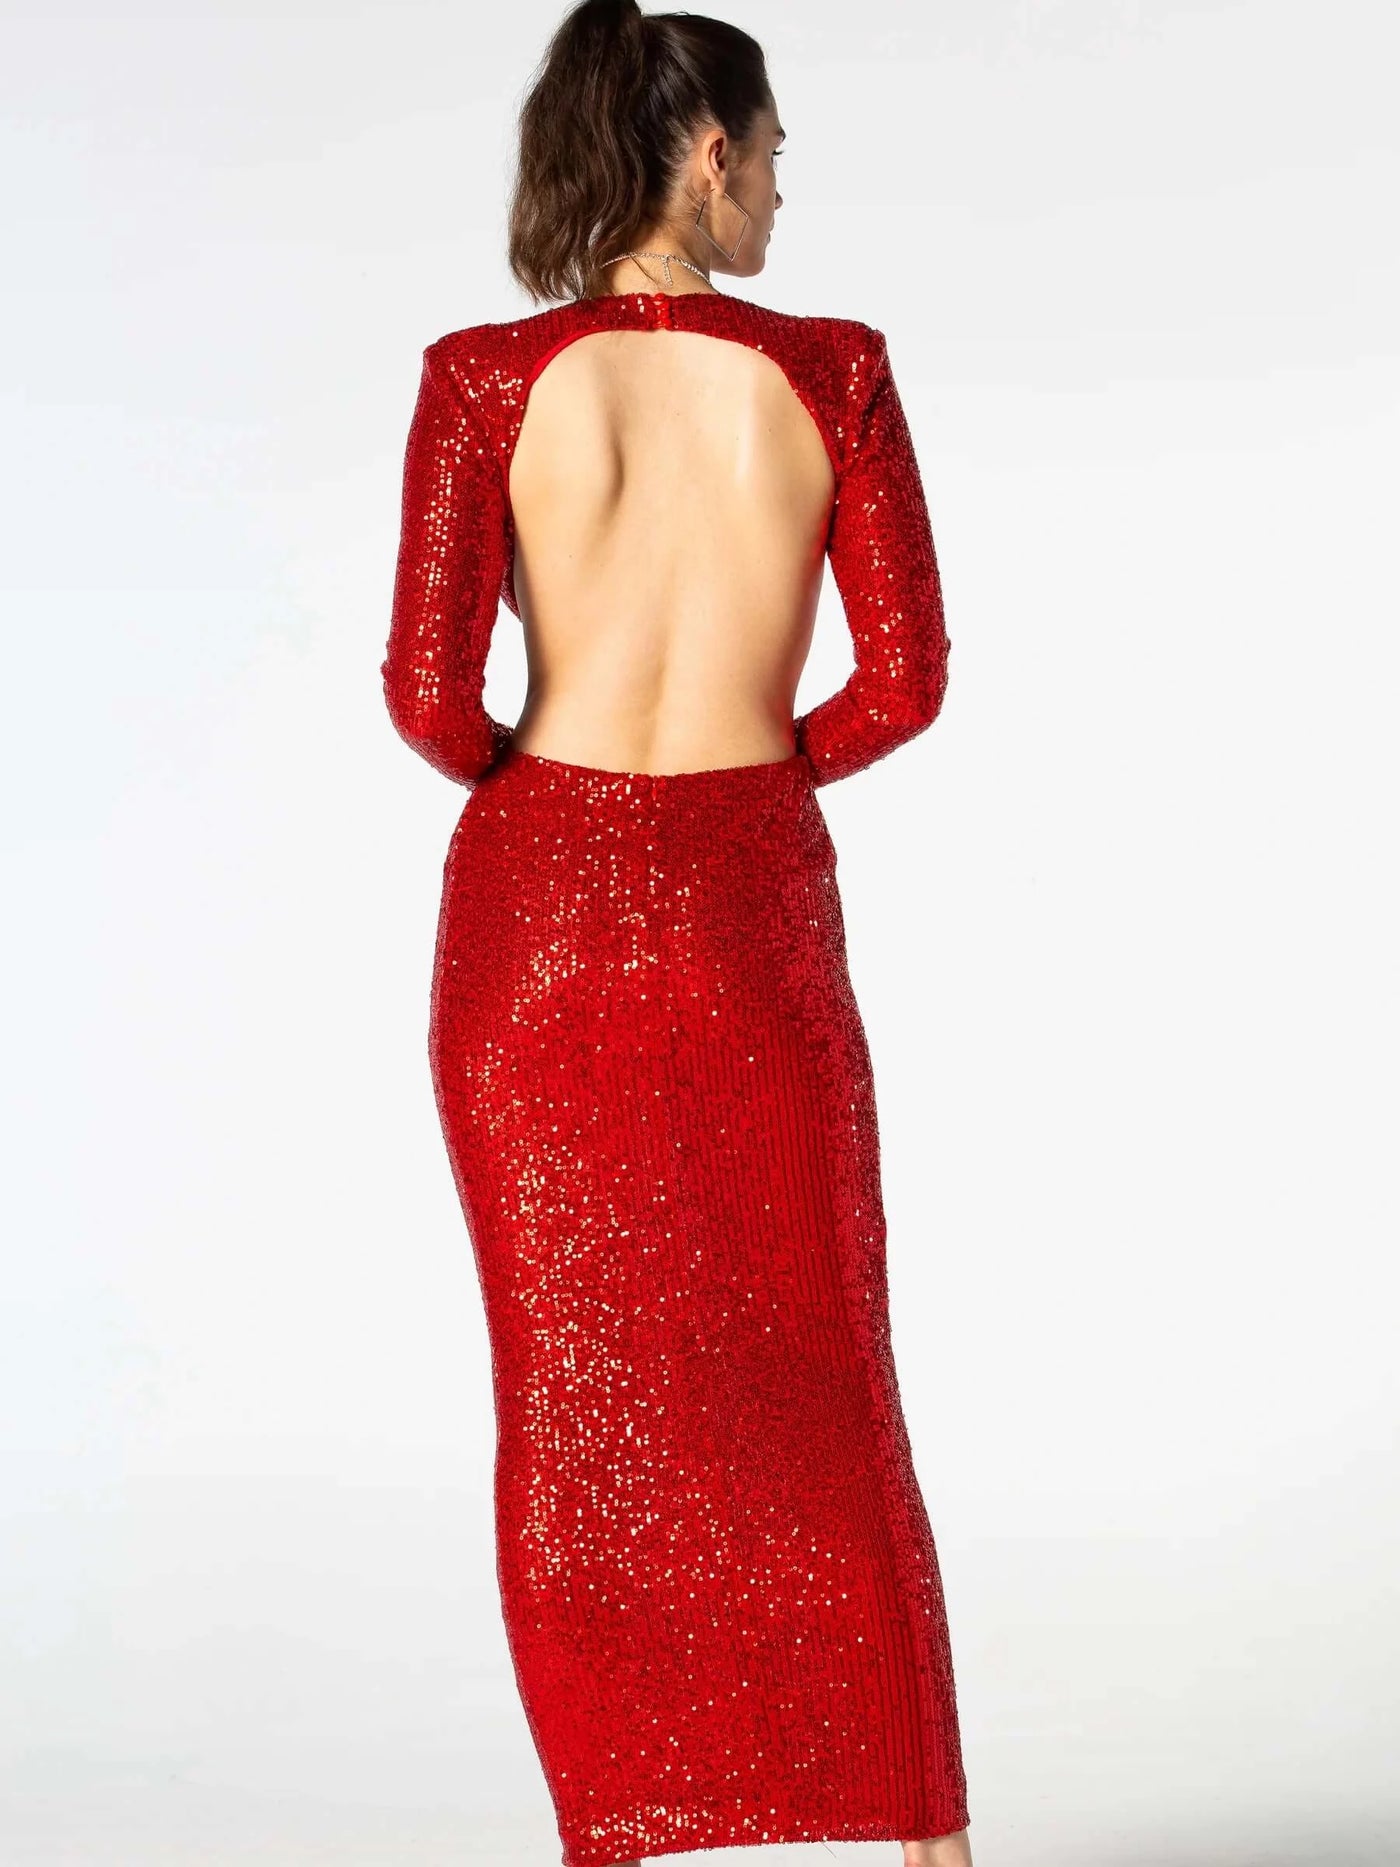 Stunning maxi dress adorned with sequin embellishments and featuring stylish cut-out details.